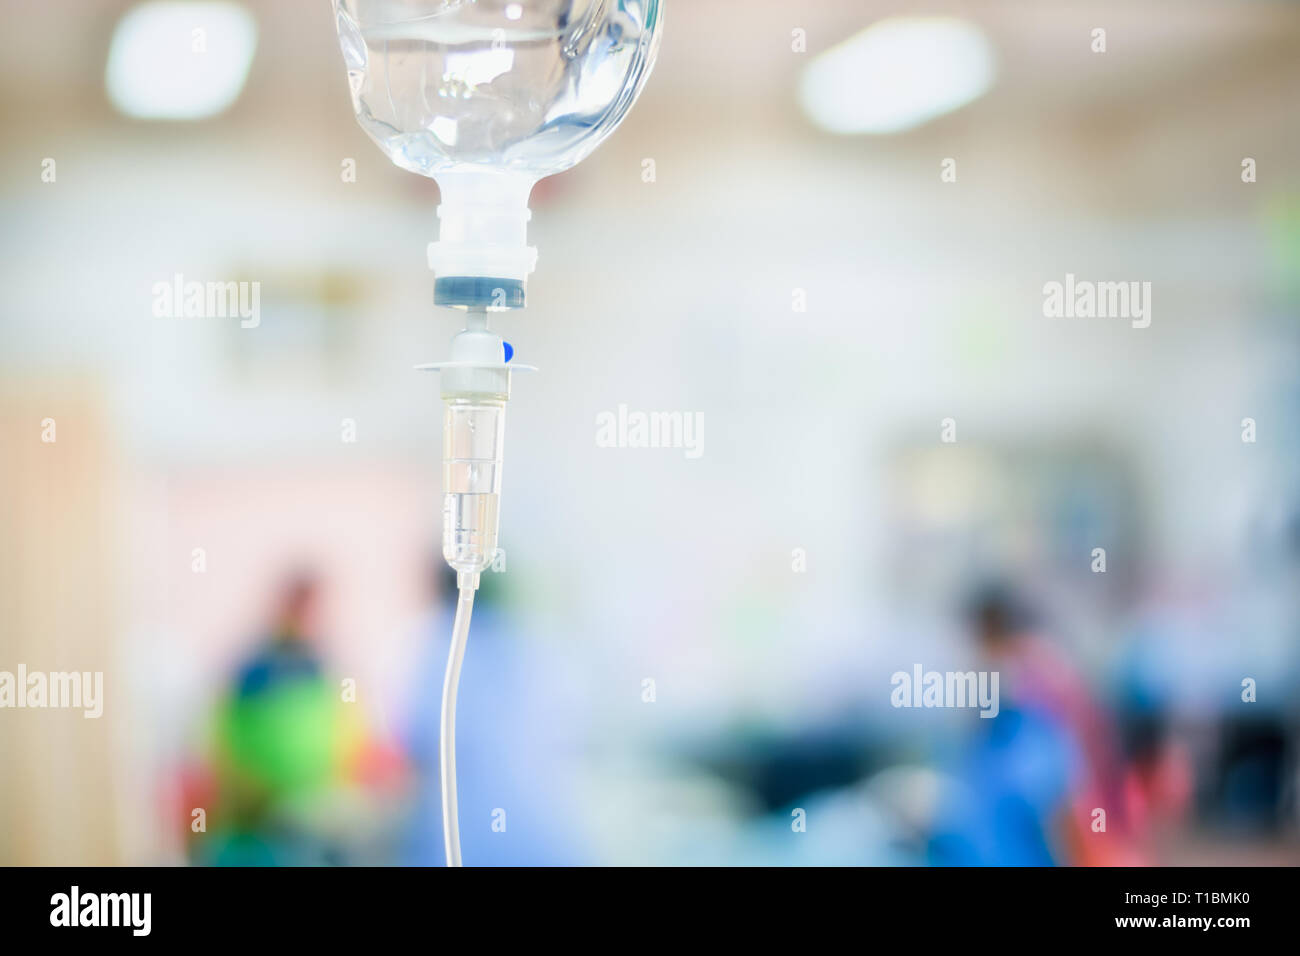 Close up saline IV drip for patient in hospital with copy space on n blurred doctor give medical and other attention to a sick person Stock Photo